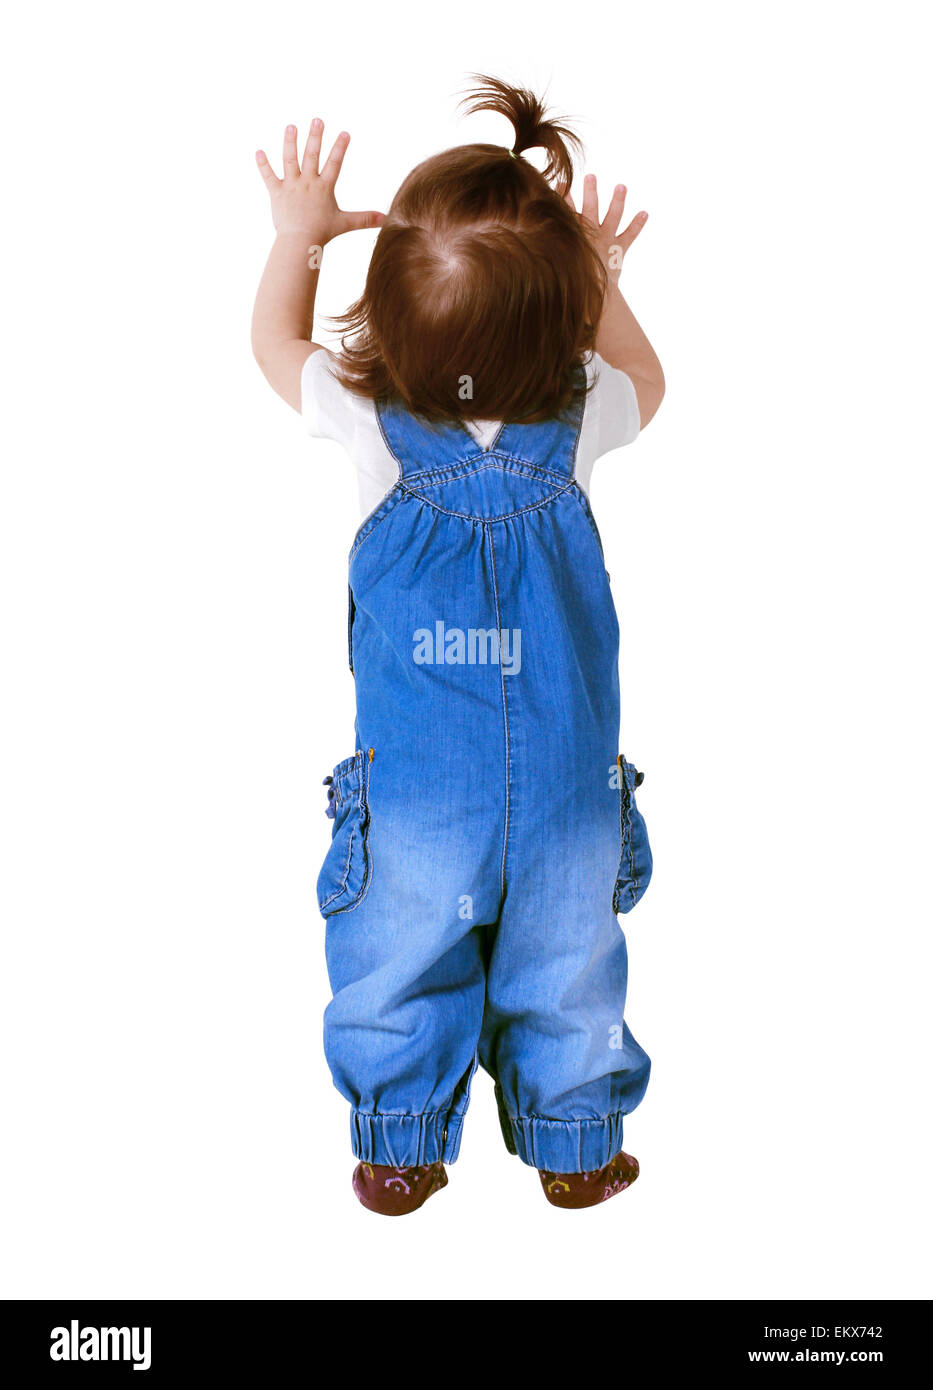 Child stands with hands up, isolated on white. Back view Stock Photo